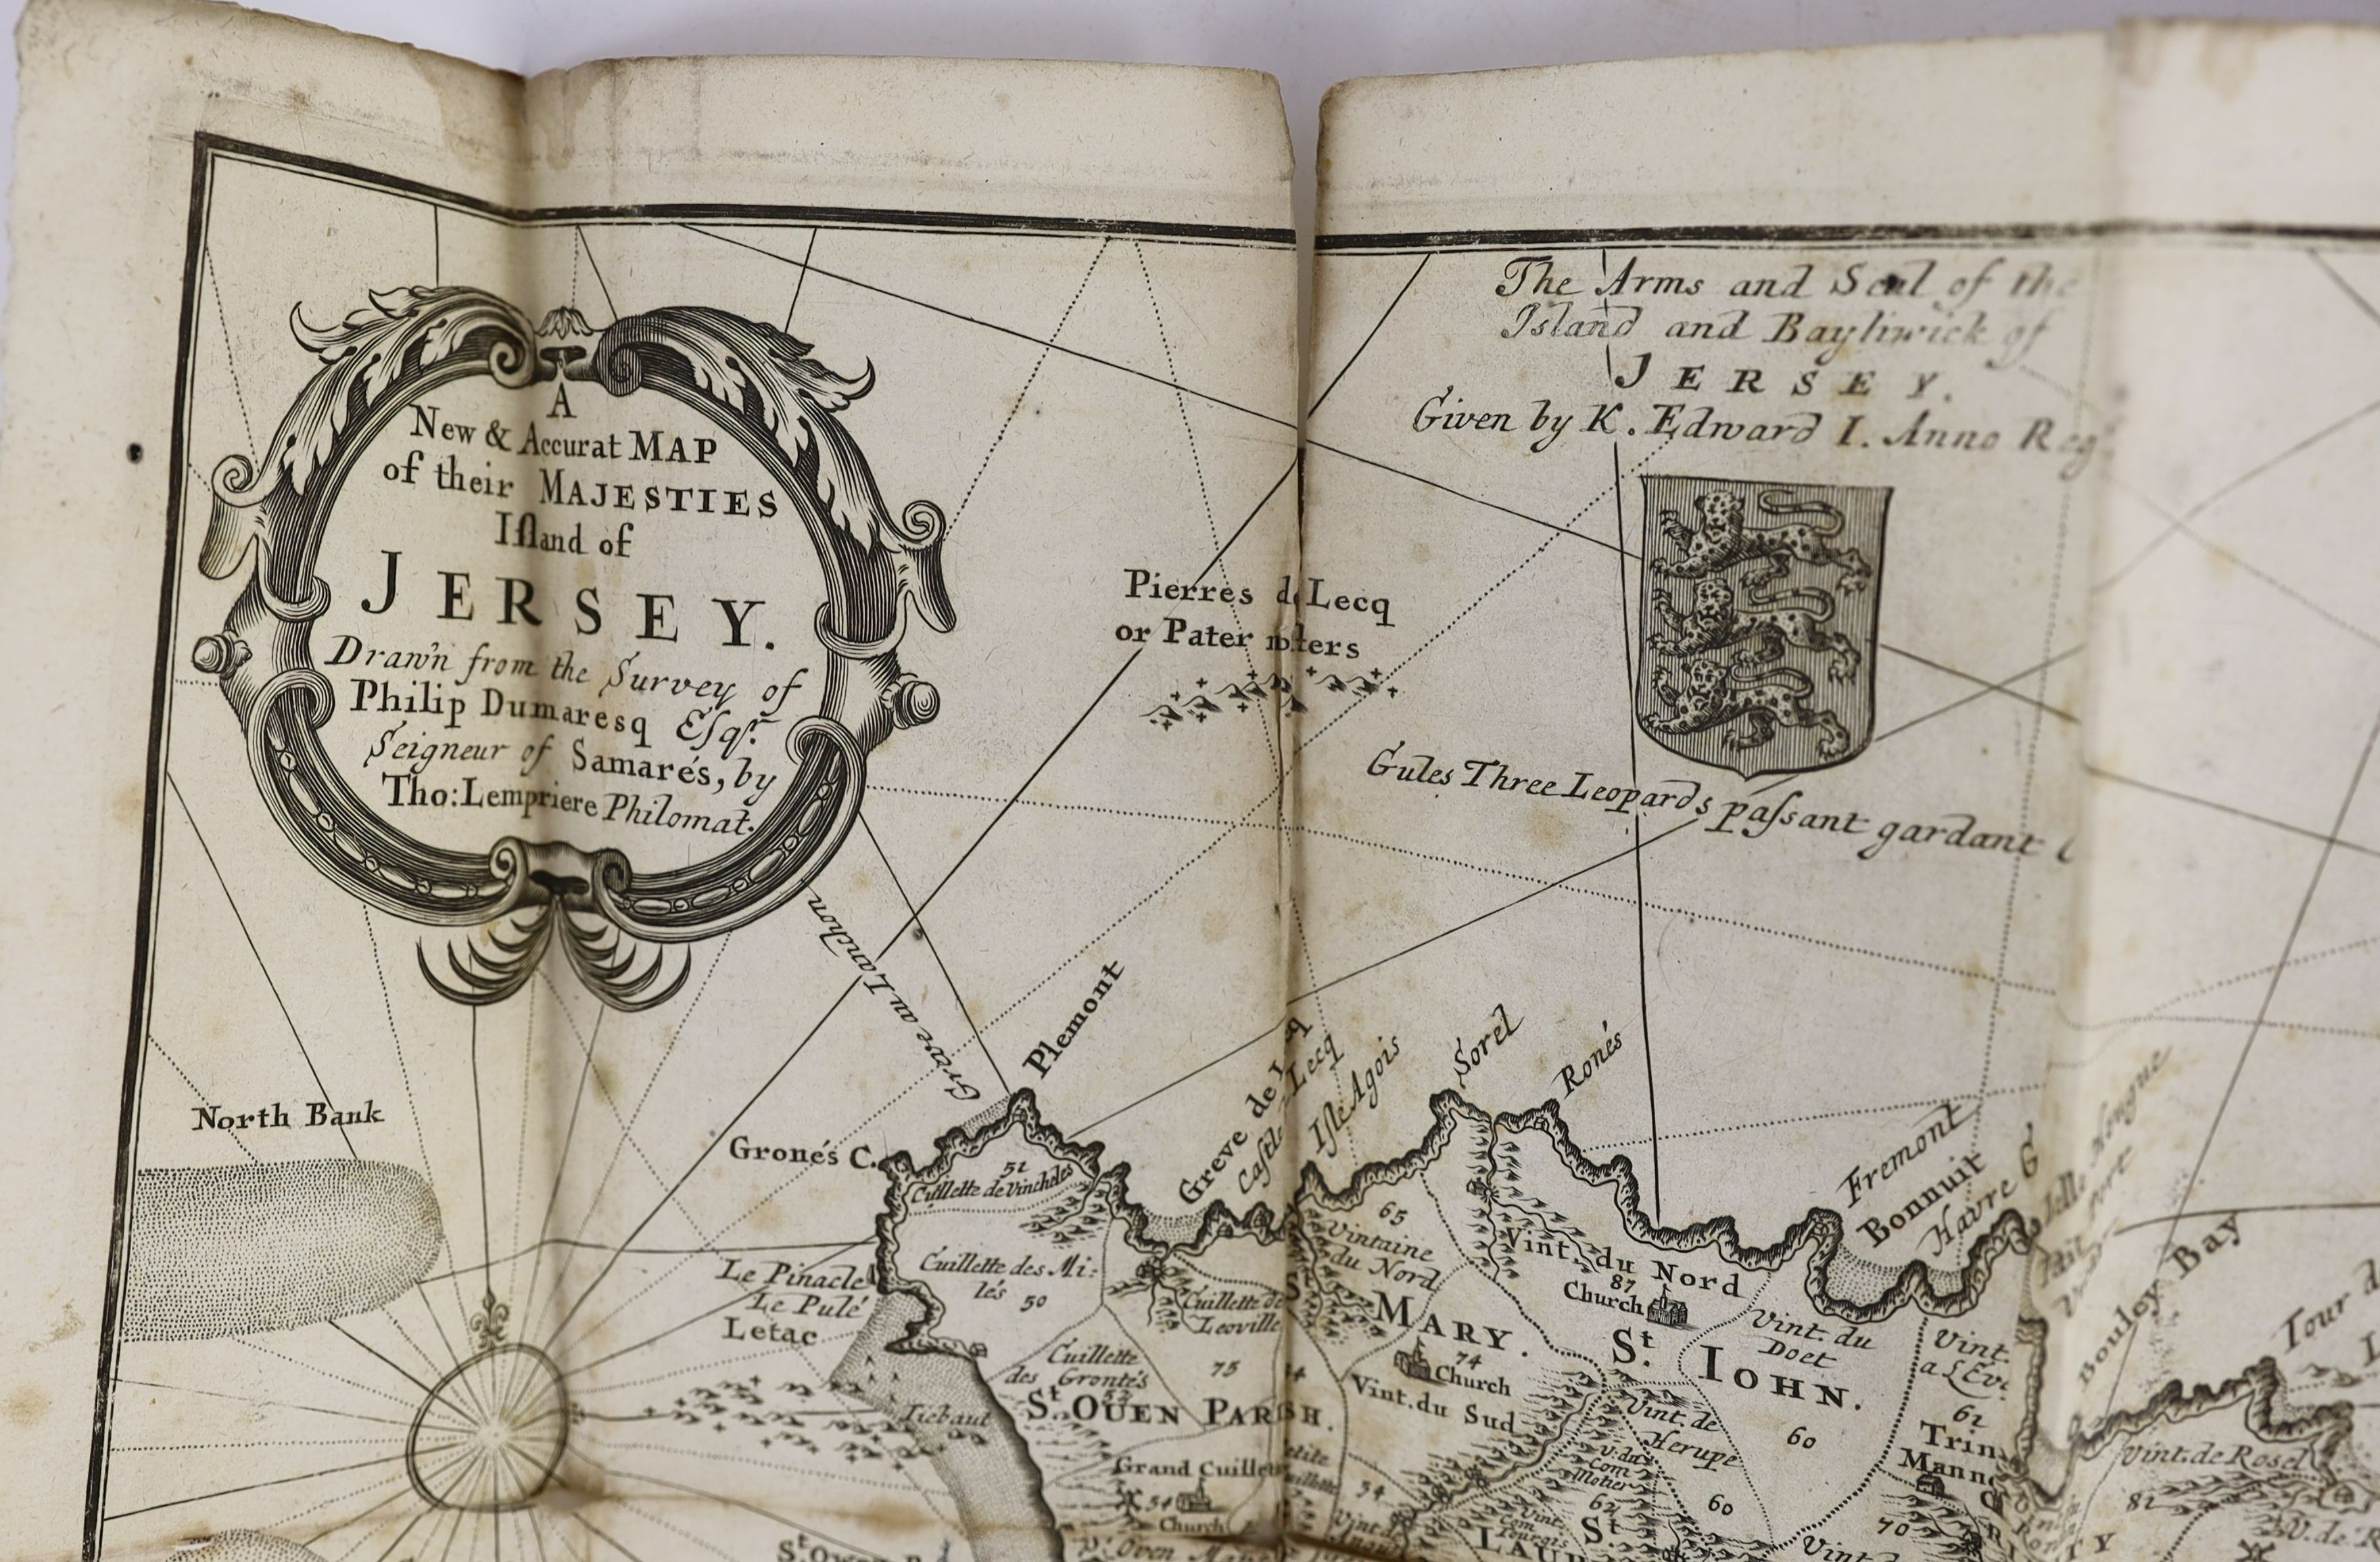 Falle, Philip - An Account of the Isle of Jersey, 8vo, calf, with folding map, John Newton, London, 1694